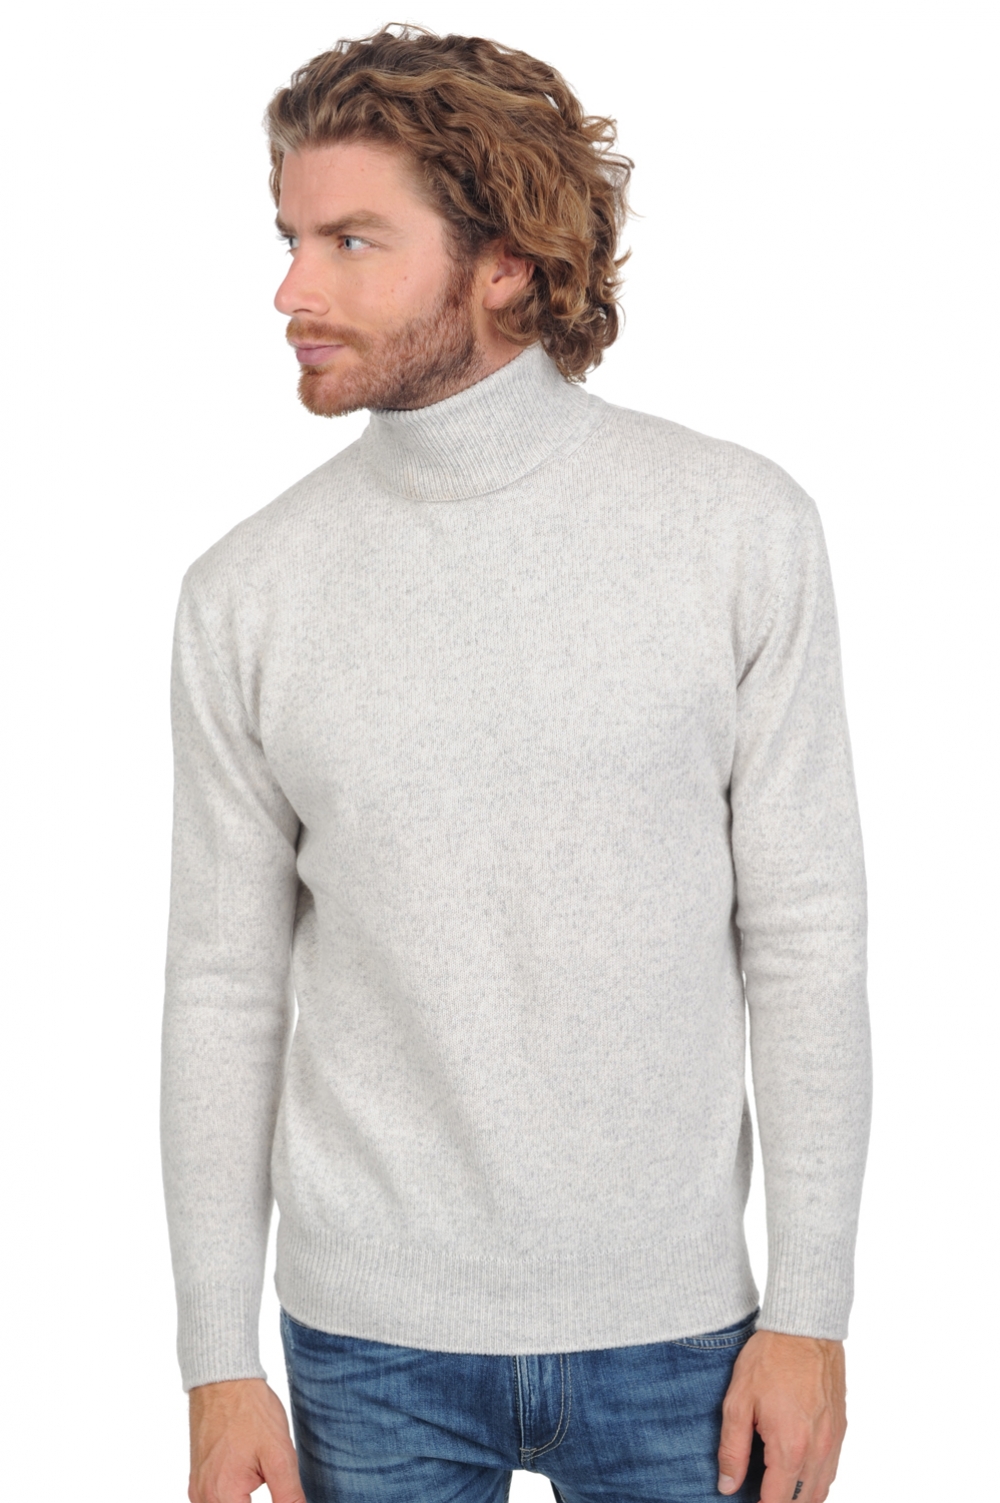 Cachemire pull homme col roule robb galet 3xl